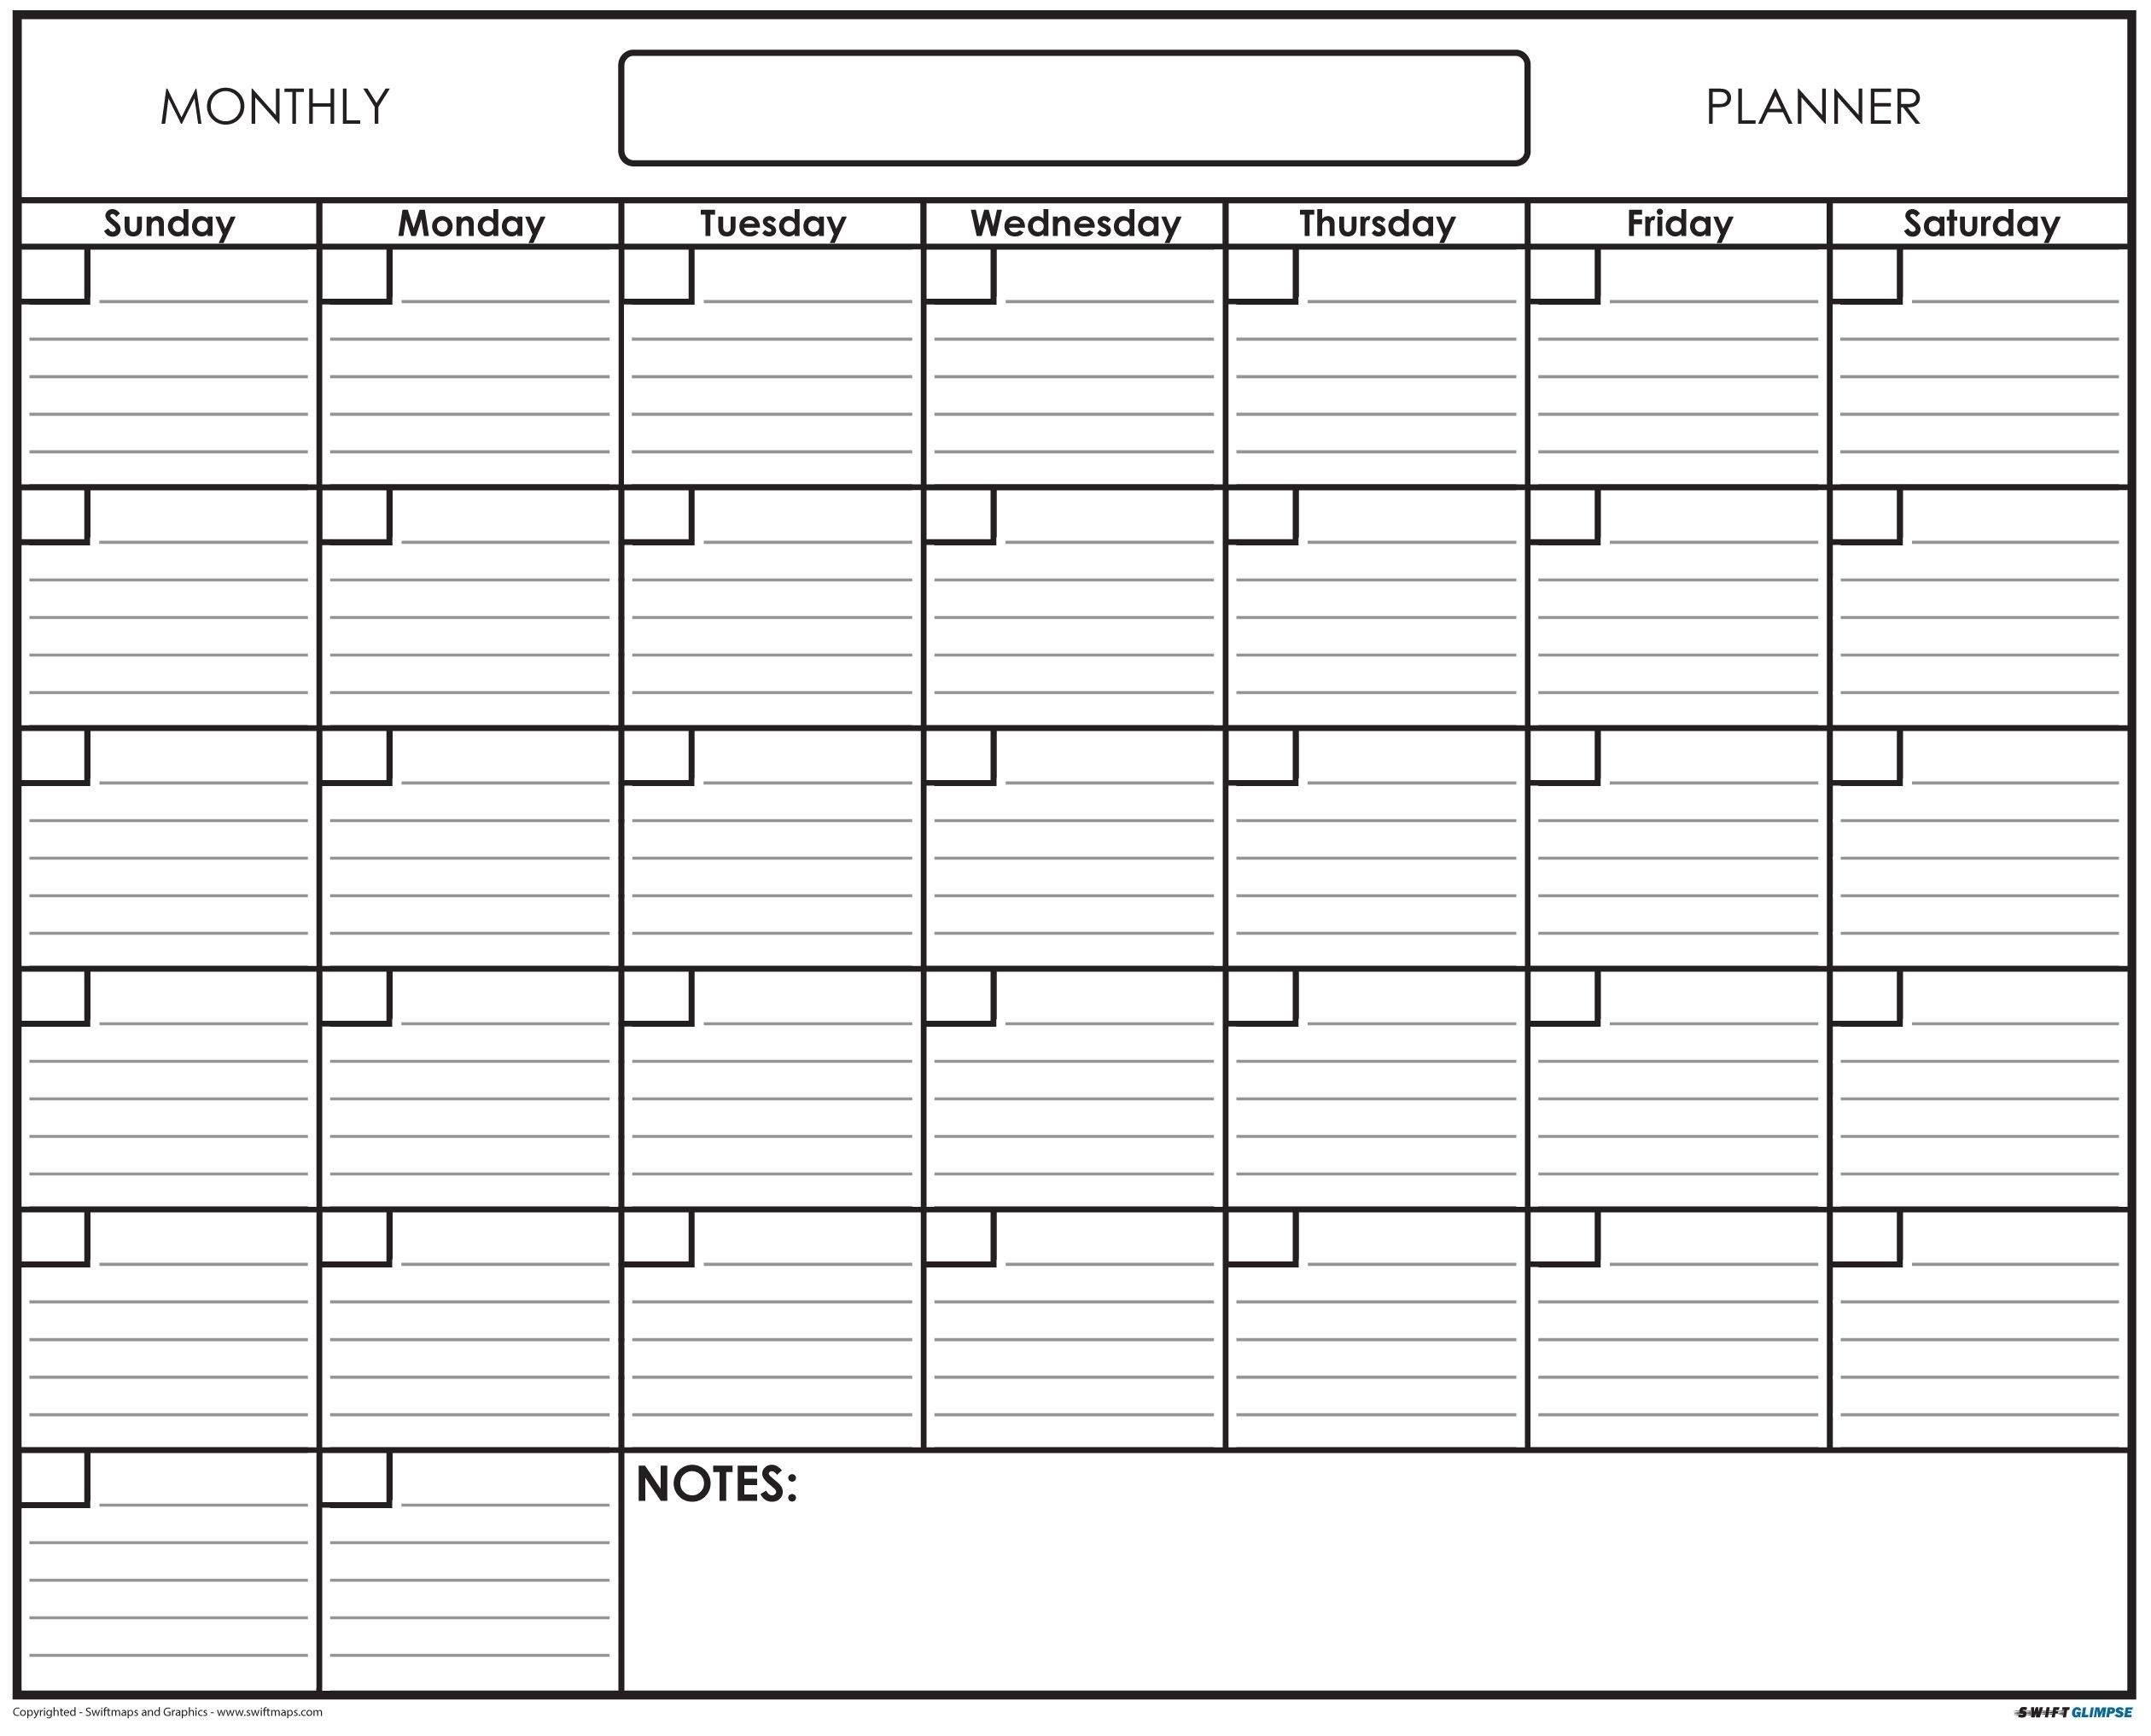 Blank Monthly Calendar With Lines | Template Calendar Printable intended for Blank Monthly Calendar With Lines